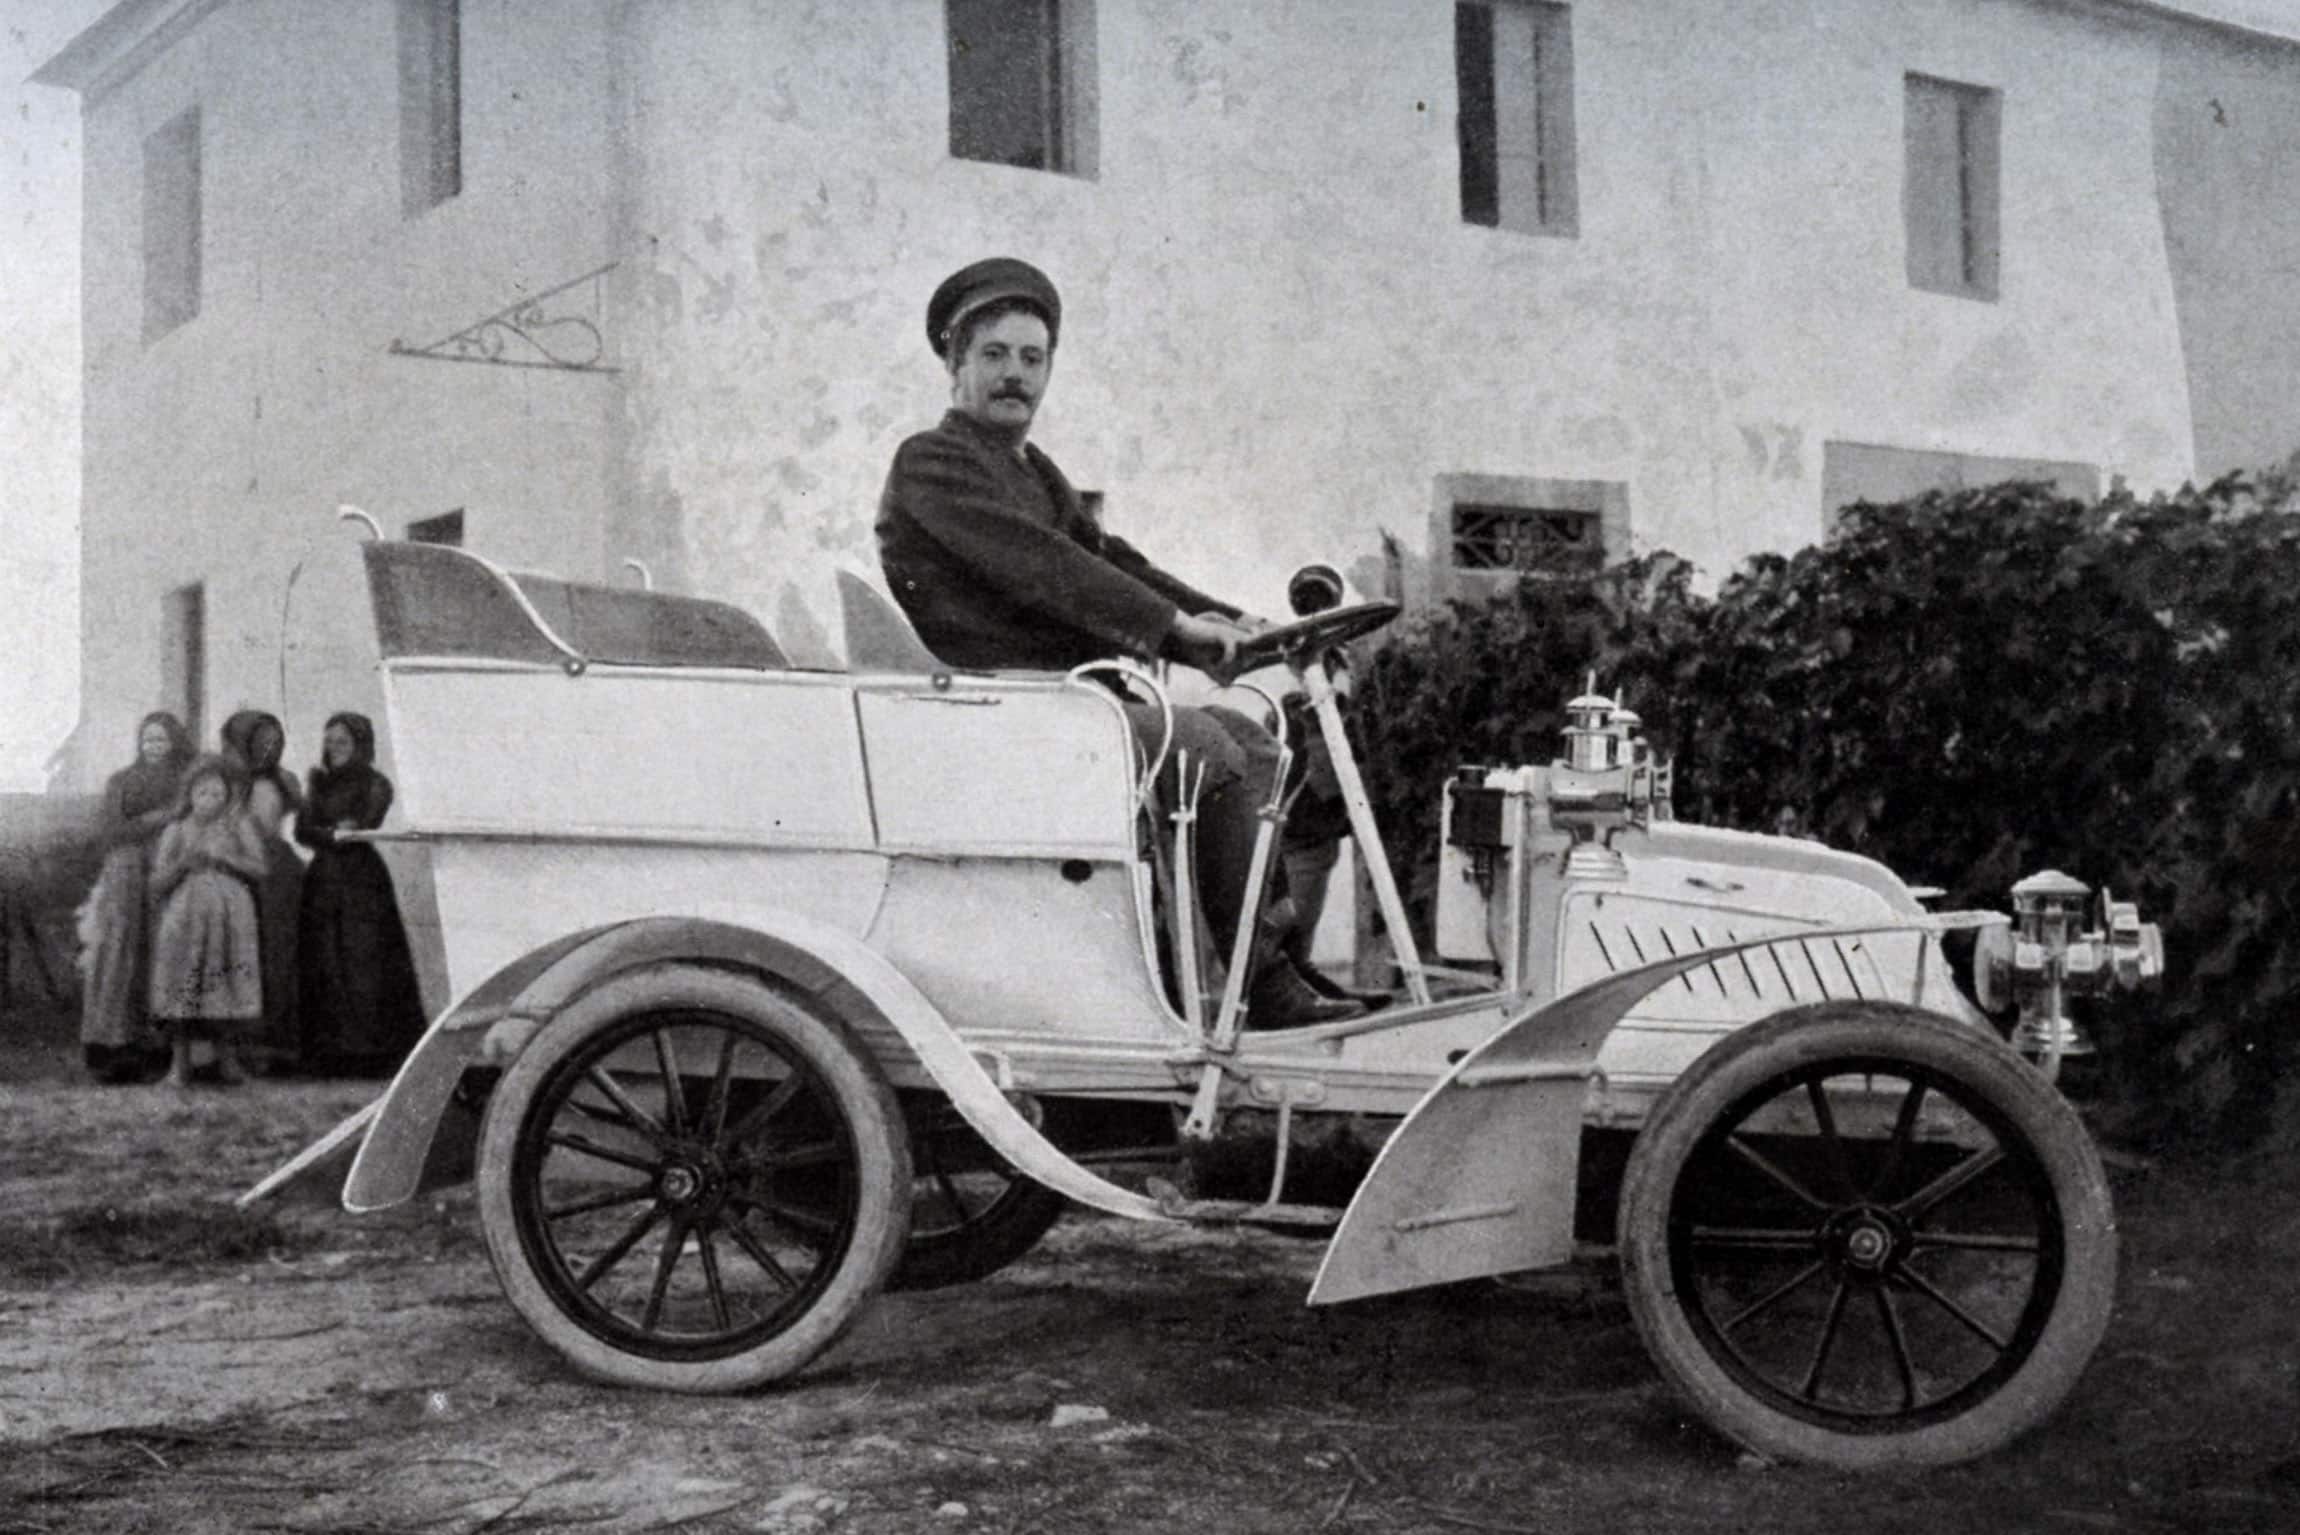 Maestros and motor cars (4): Puccini got there first